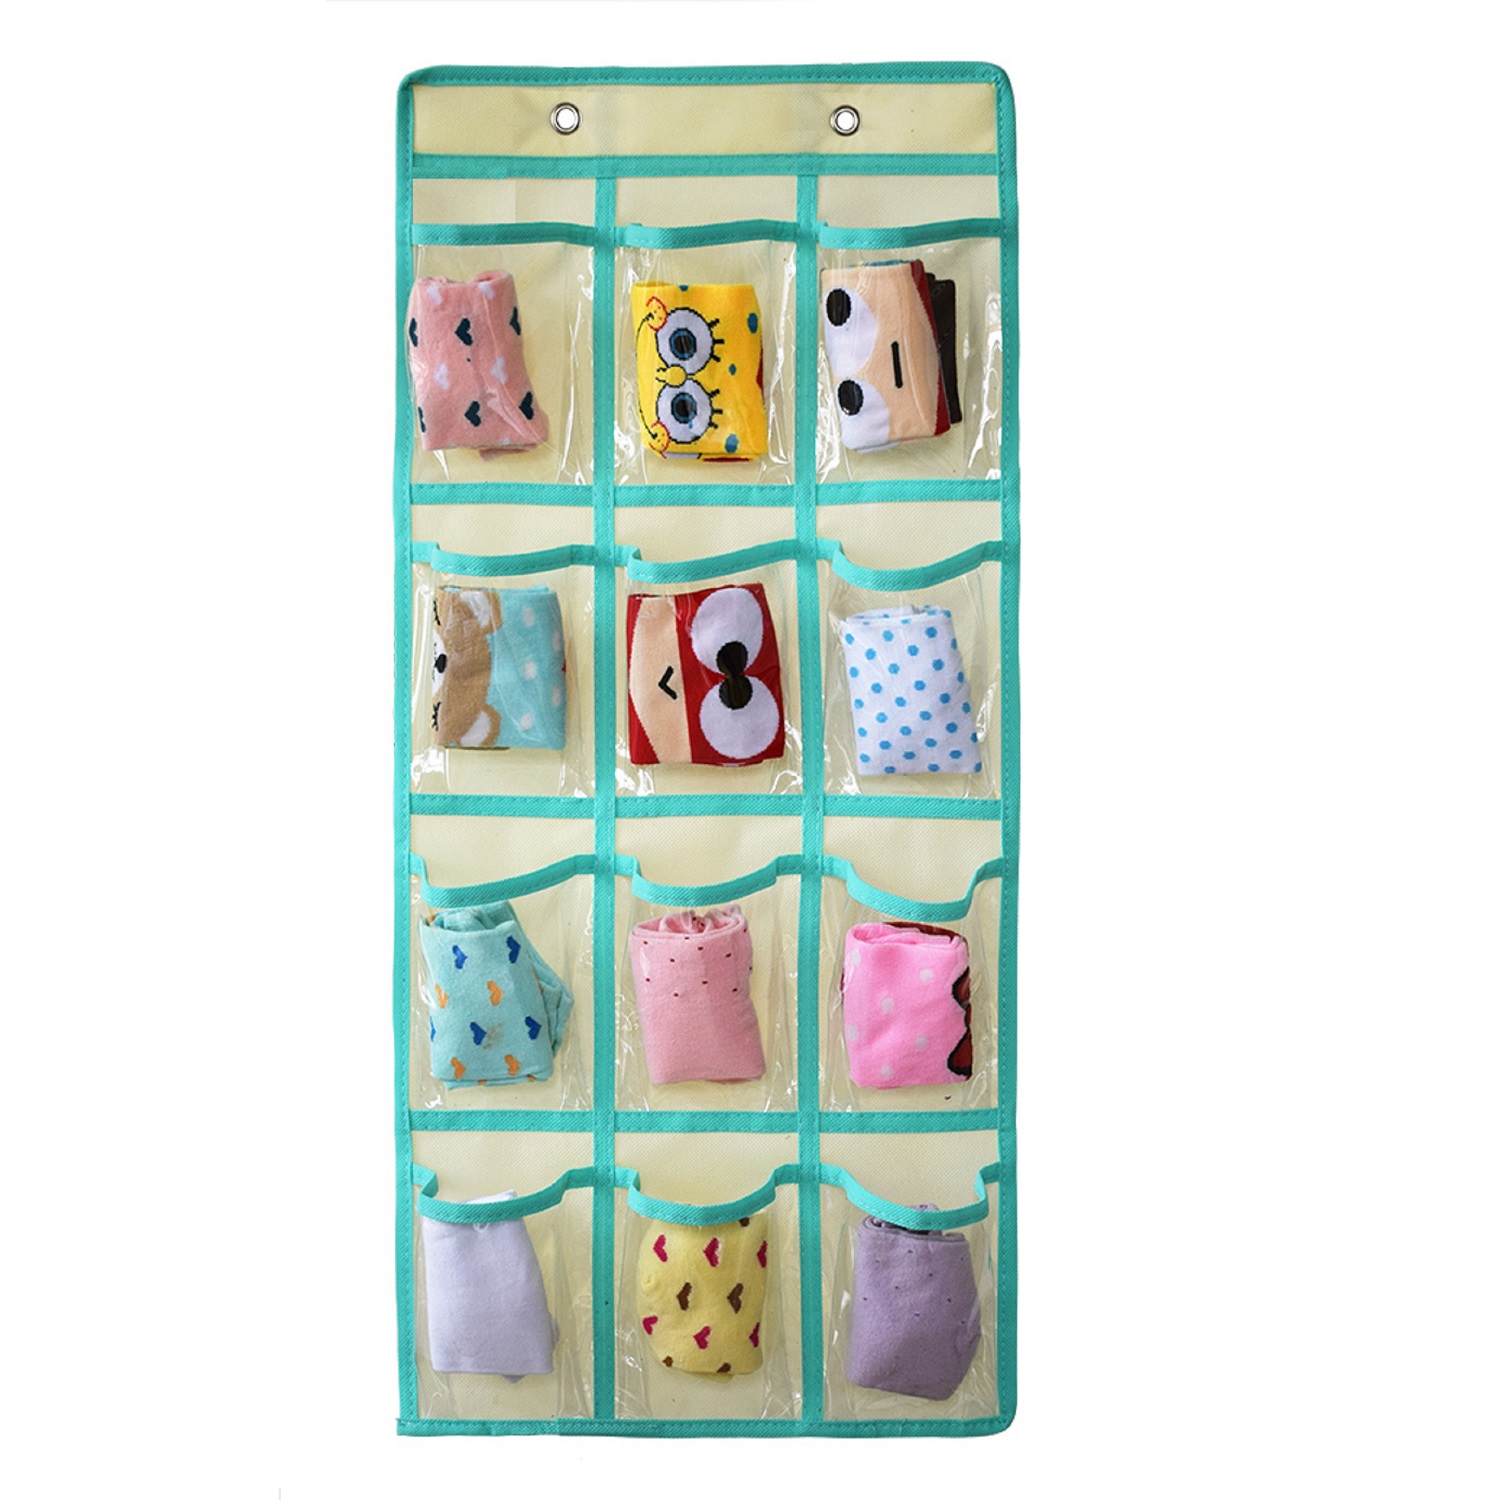  Ciieeo 5pcs 12 Compartment Storage Hanger Anchor Chart Holder  Wall Necklace Holder Classroom Pocket Storage Hangers Pocket Chart for Cell  Phone Oxford Cloth Pocket Bag On The Door Child : Baby